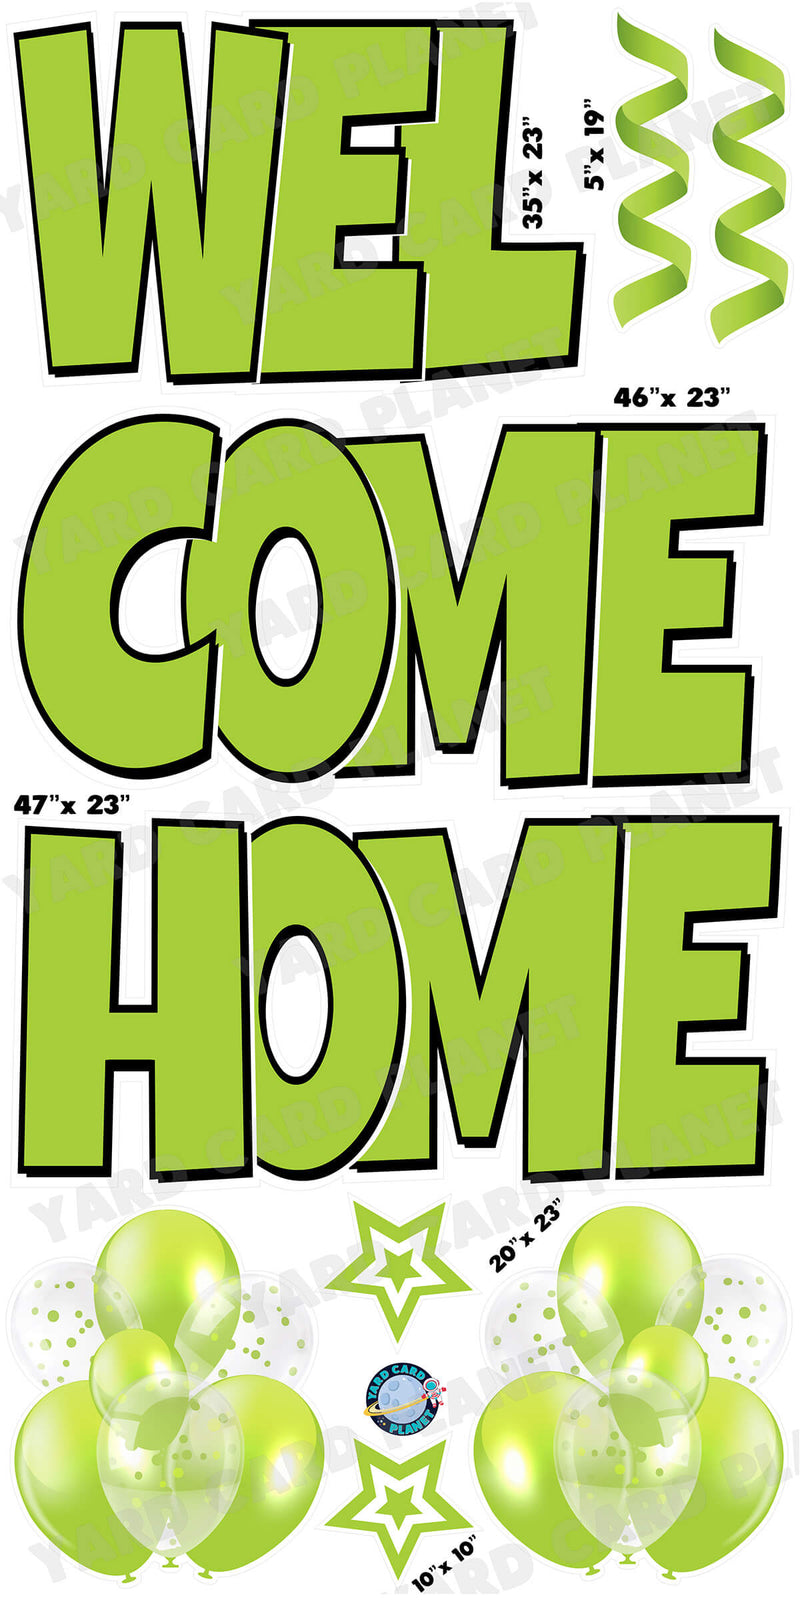 Large 23" Welcome Home Yard Card EZ Quick Sets in Luckiest Guy Font and Flair in Lime Green Solid Color